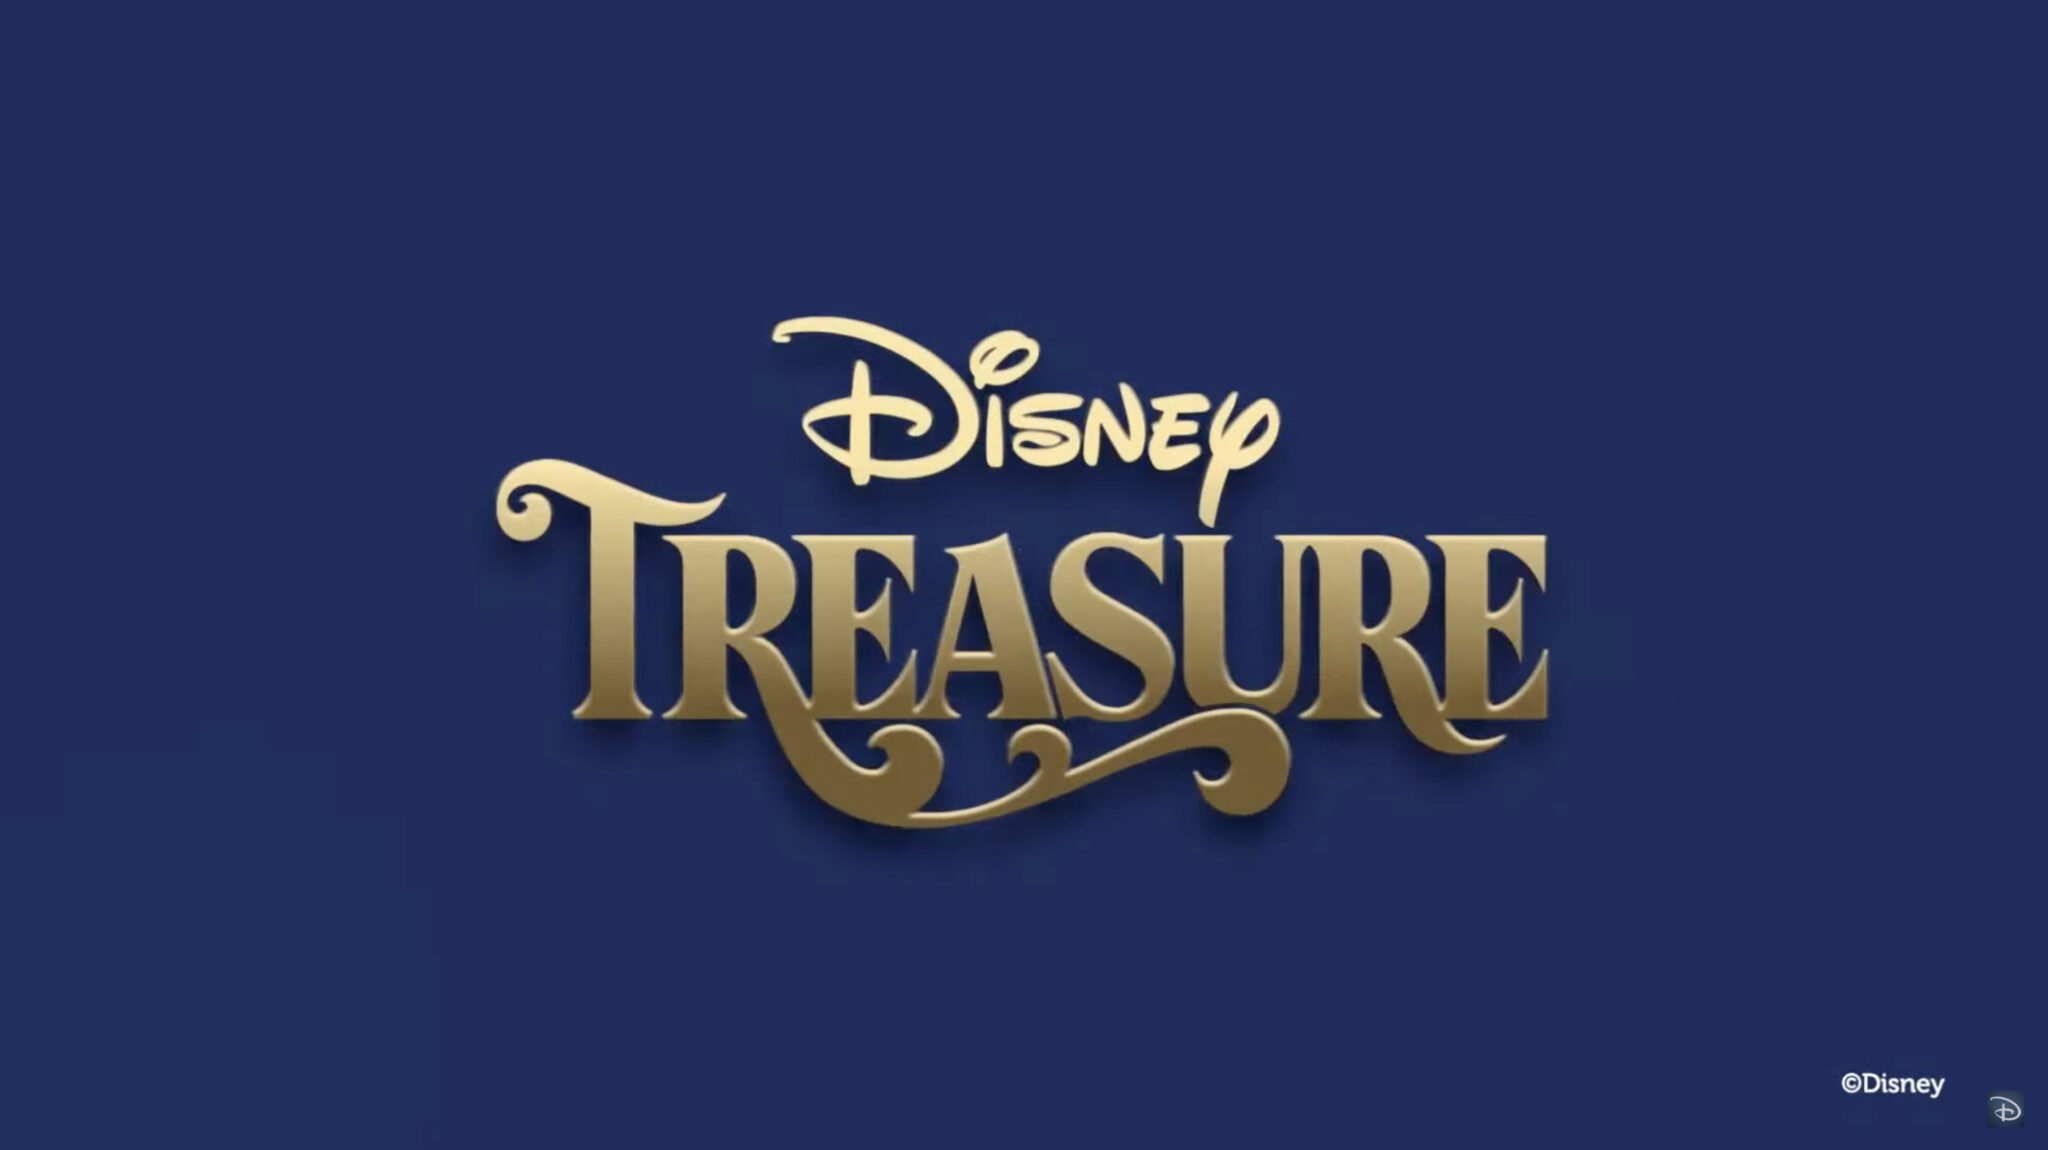 New Details About Disney Cruise Line’s Newest Ship, the Disney Treasure